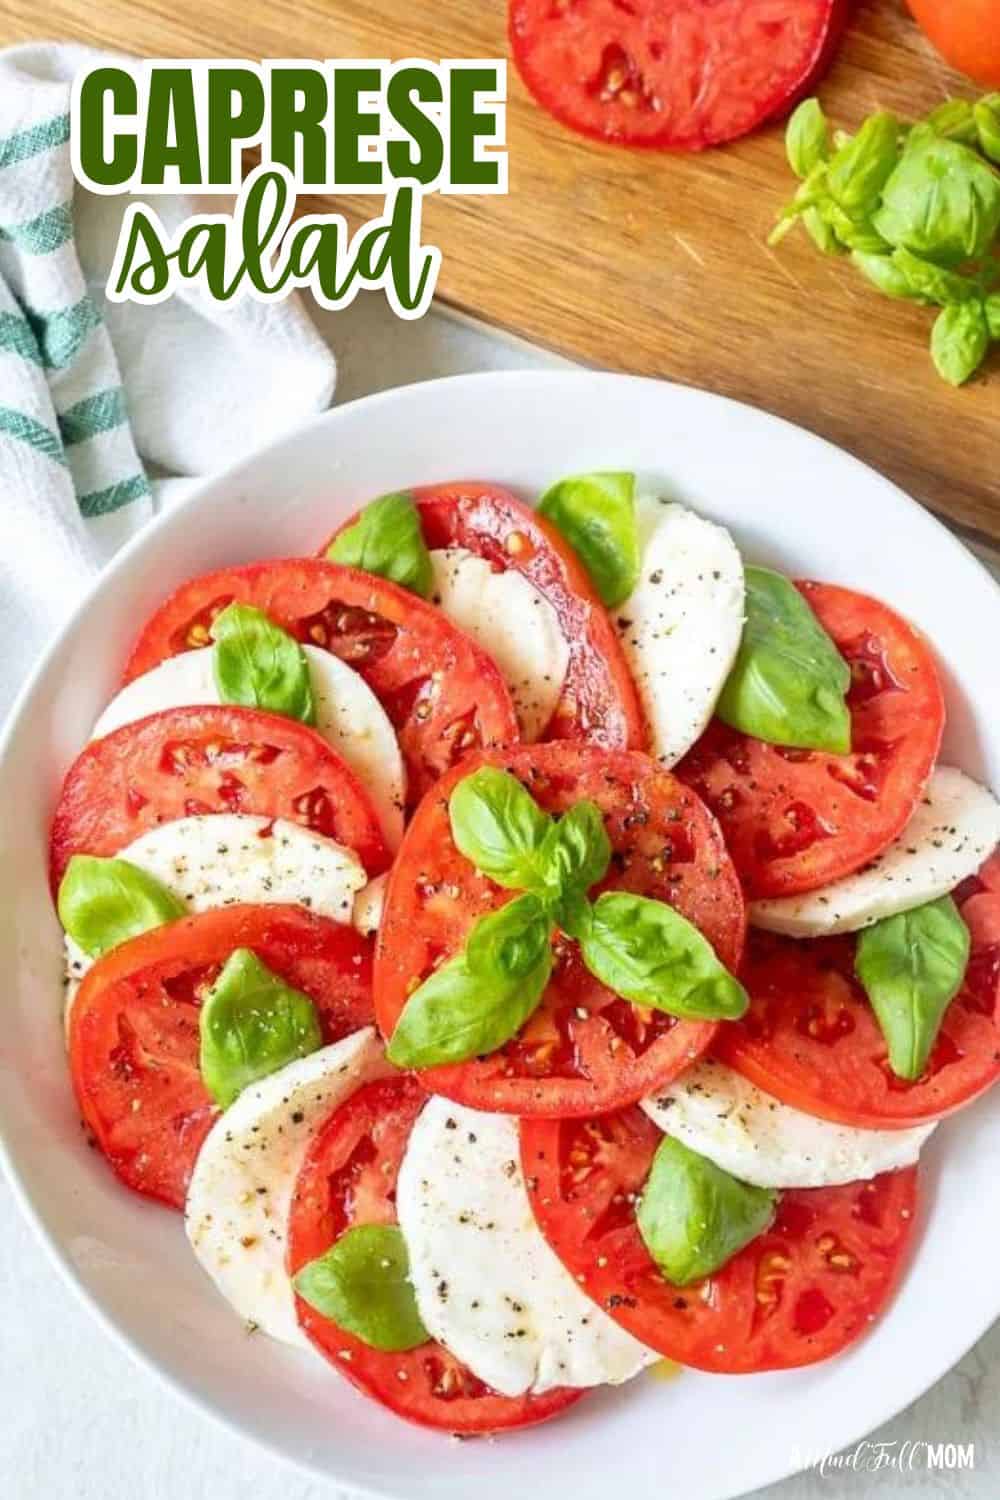 Made with juicy tomatoes, fresh mozzarella and fragrant basil, this Tomato Mozzarella Salad, AKA Caprese Salad, is the ultimate recipe to make with vine-ripened tomatoes! 